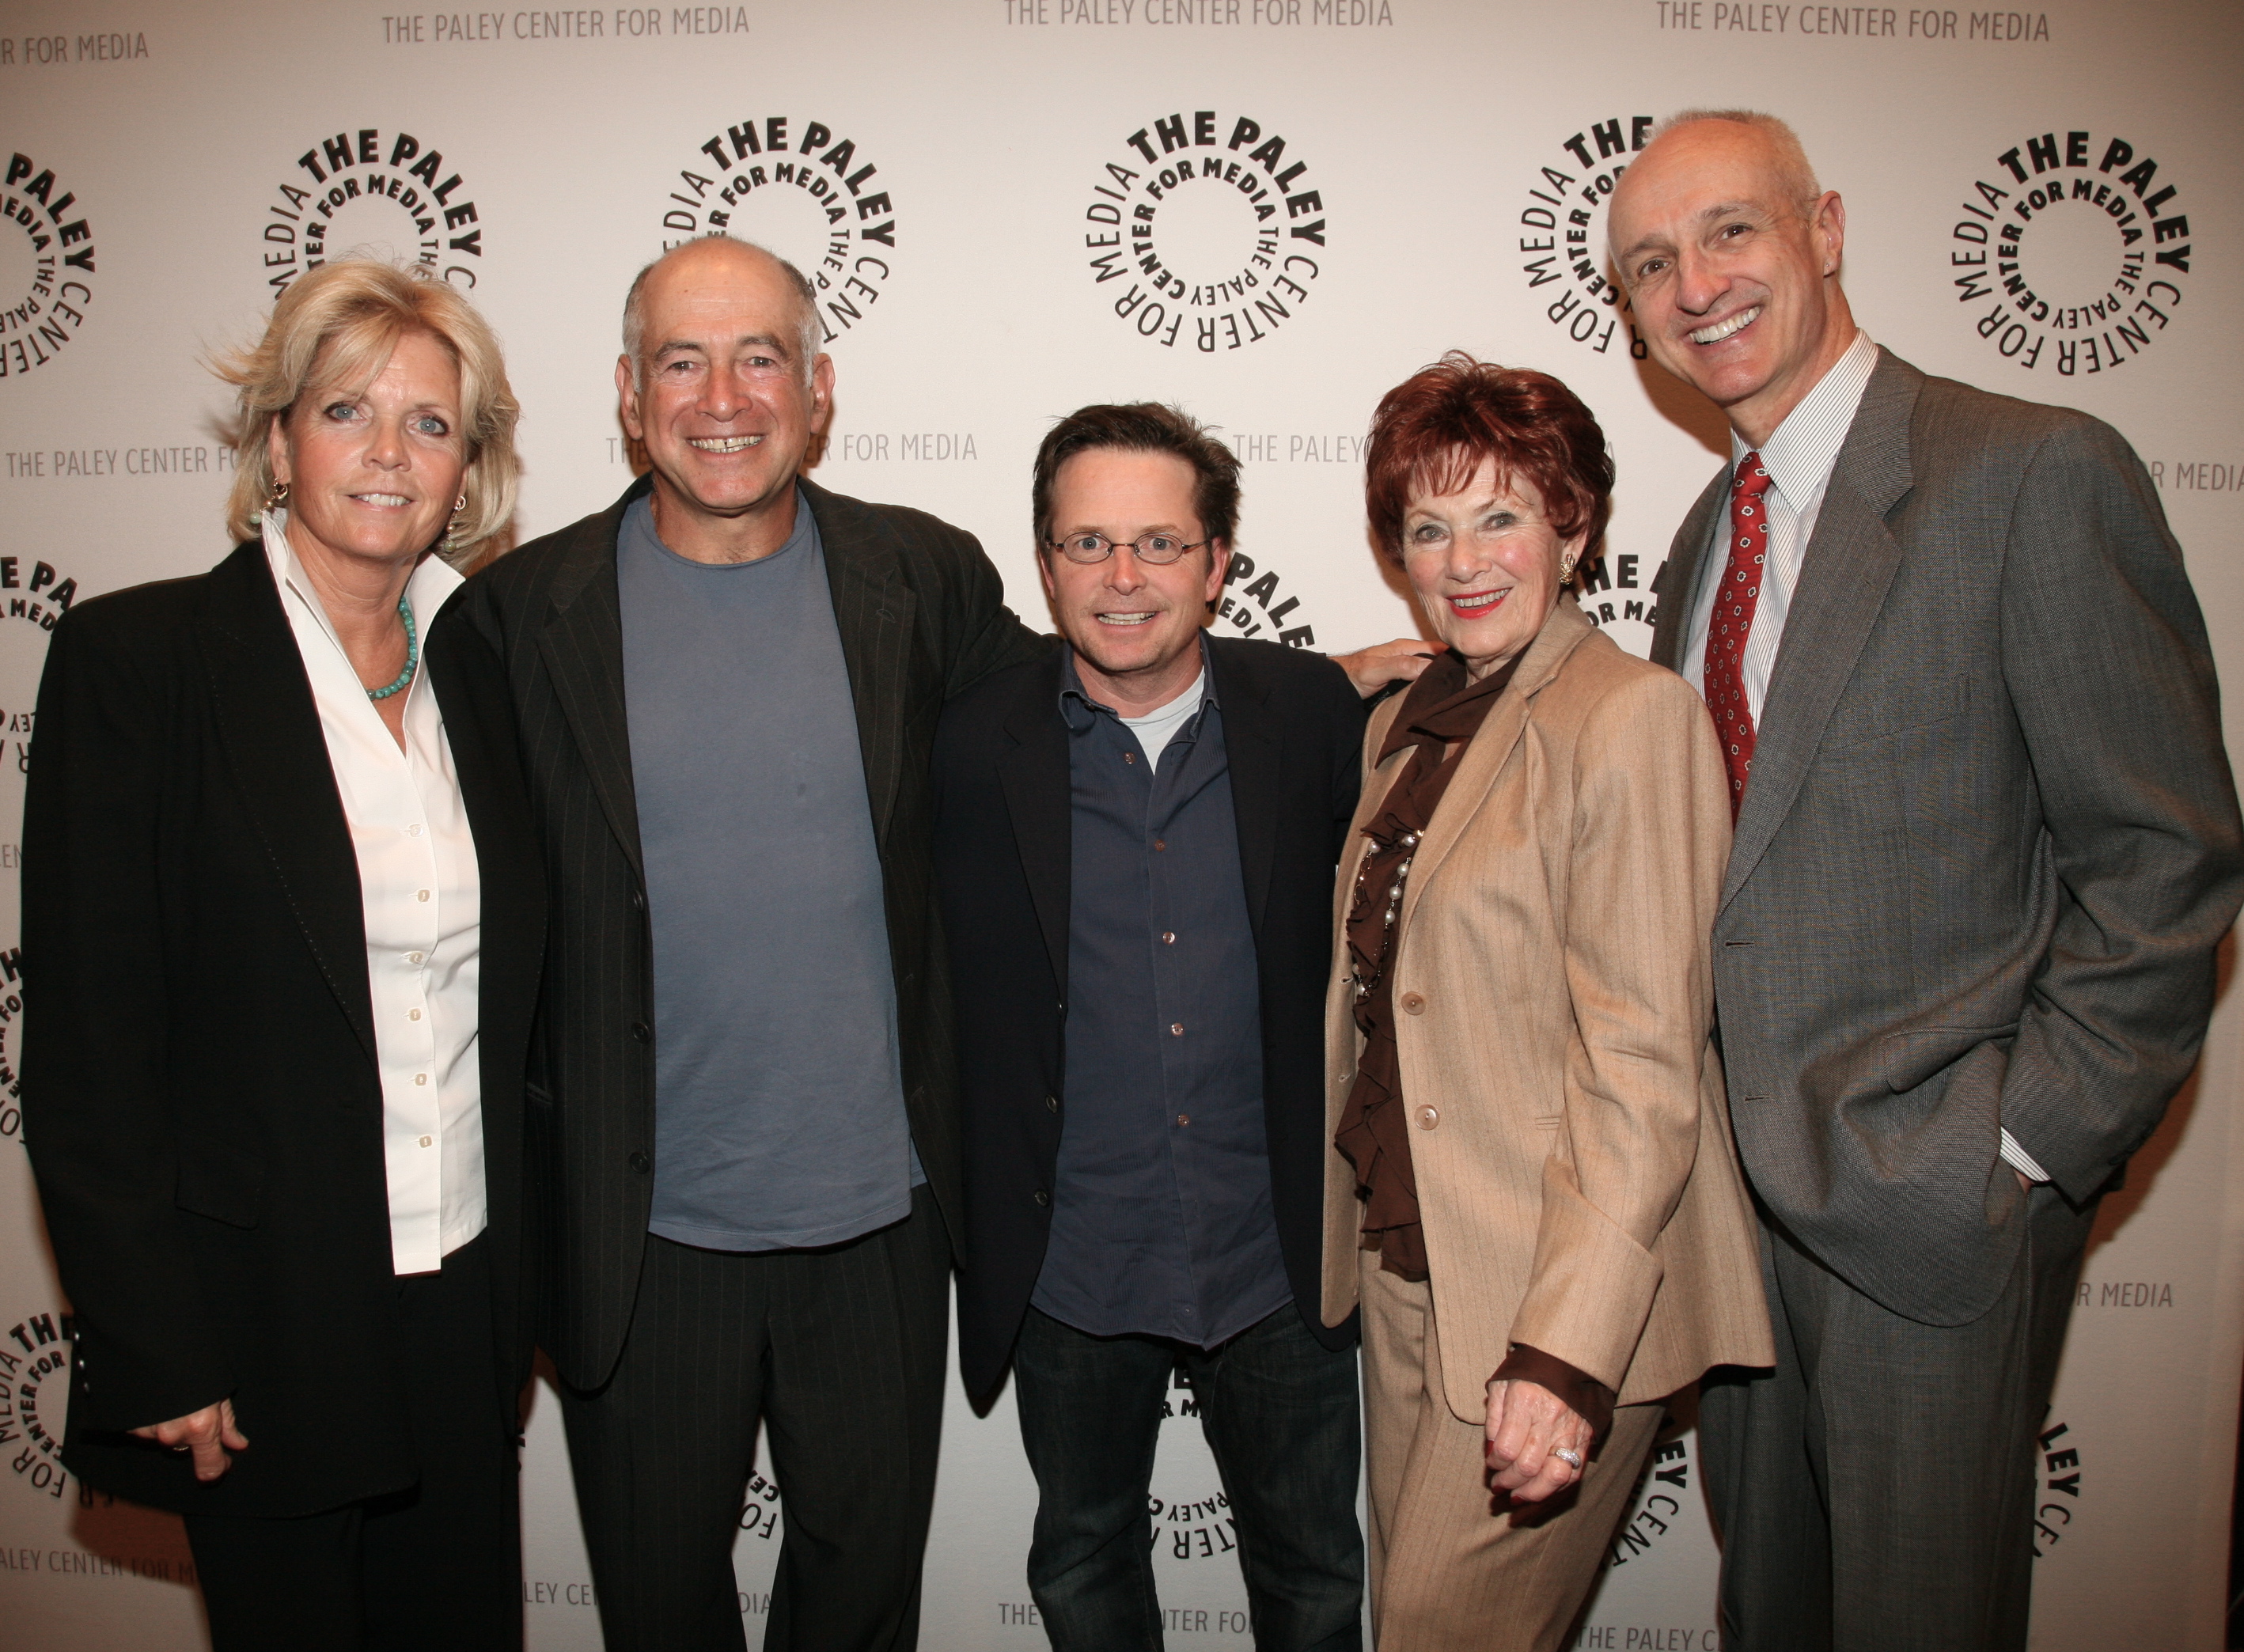 Michael with (L to R) Meredith Baxter, Gary David Goldberg, Michael J. Fox and Marian Ross at the Paley Center for Media